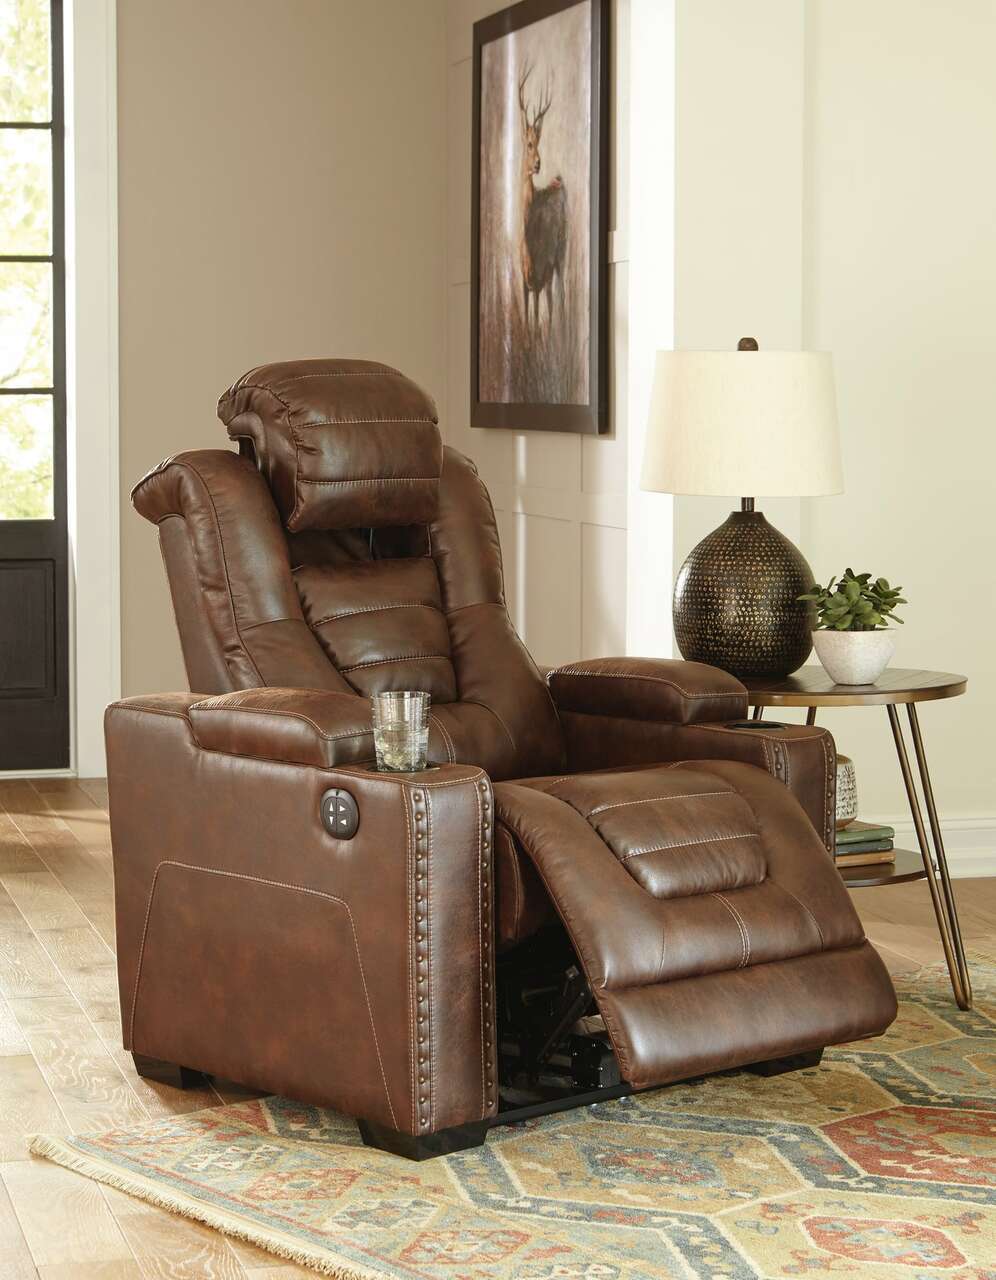 245 Power Recliner USB Ports Thyme $995.99